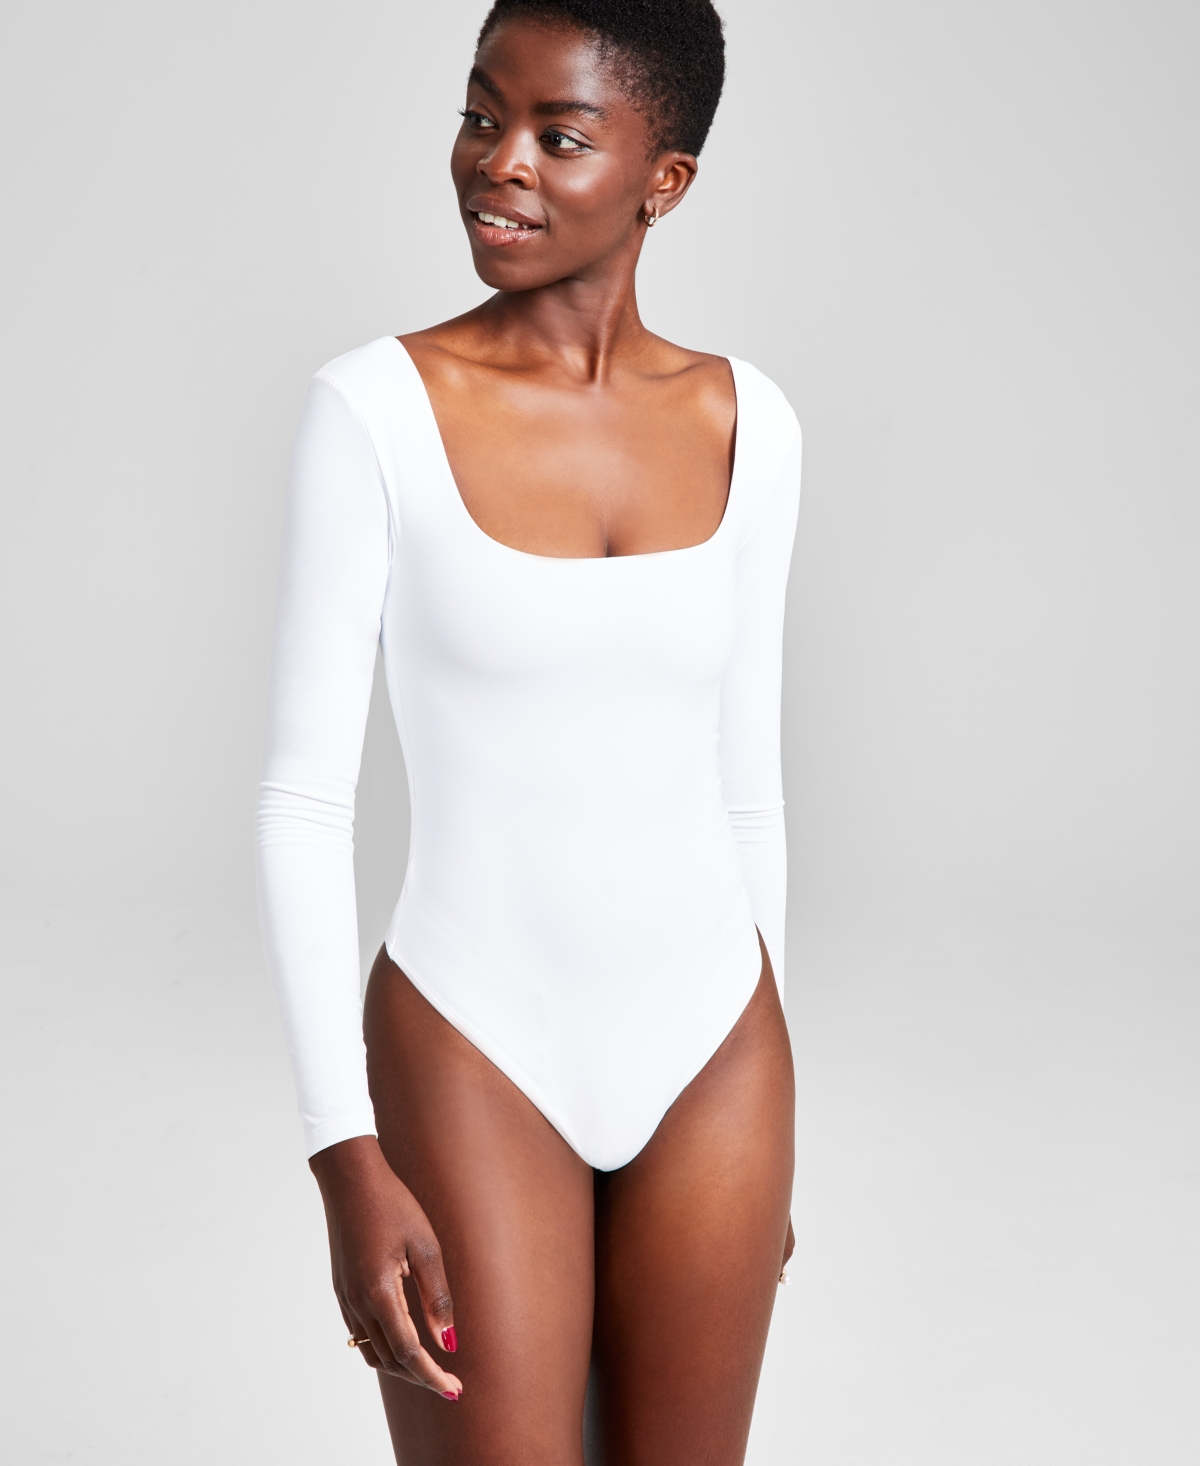 And Now This Women's Square-Neck Short-Sleeve Bodysuit - Macy's